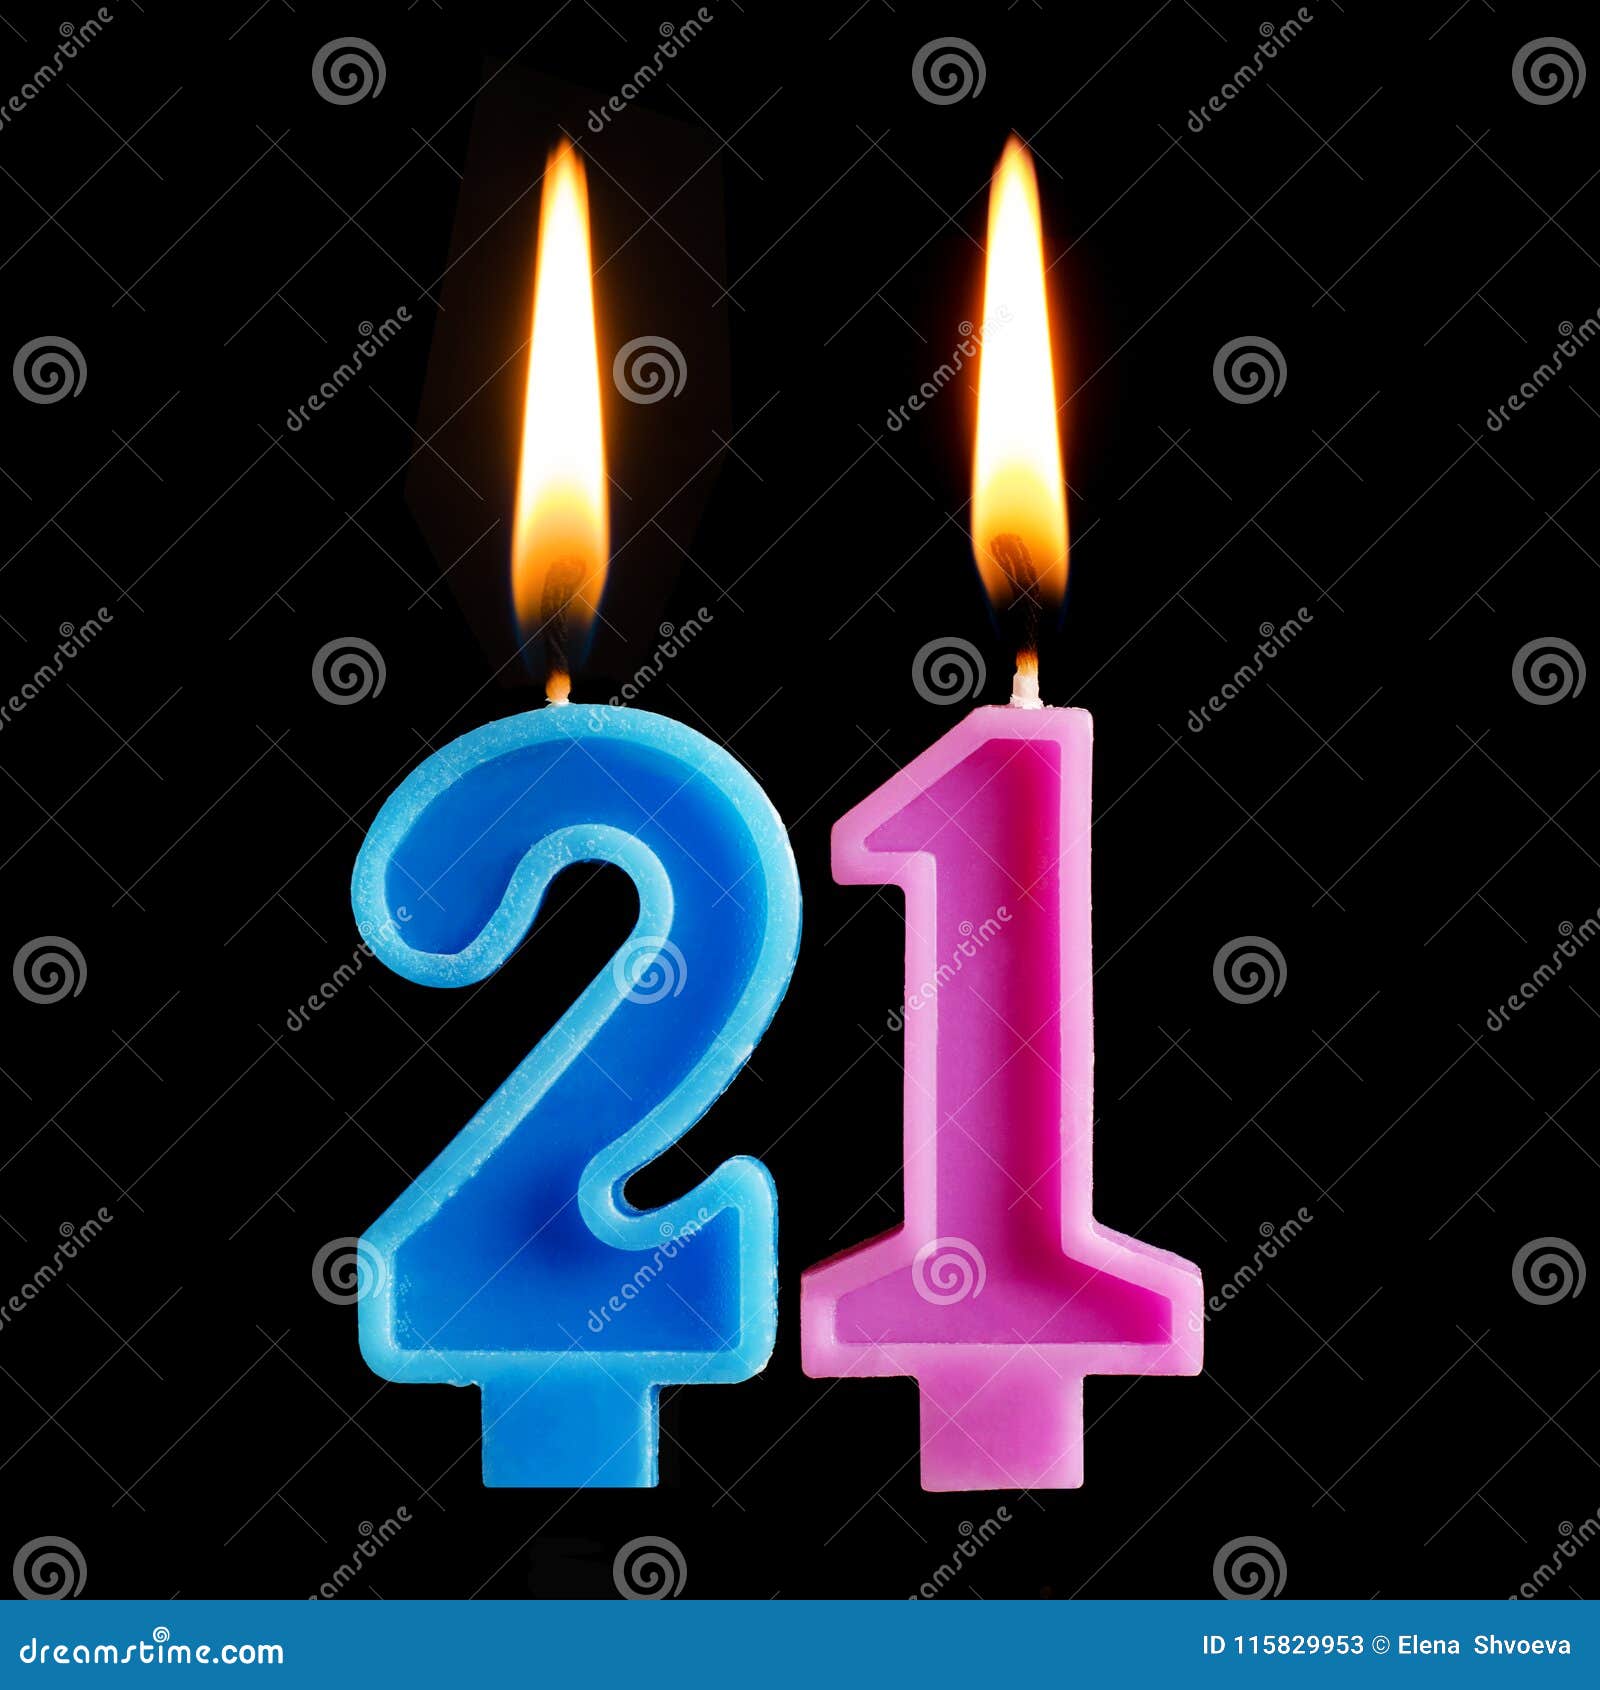 Burning Birthday Candles In The Form Of 21 Twenty One For Cake Isolated ...